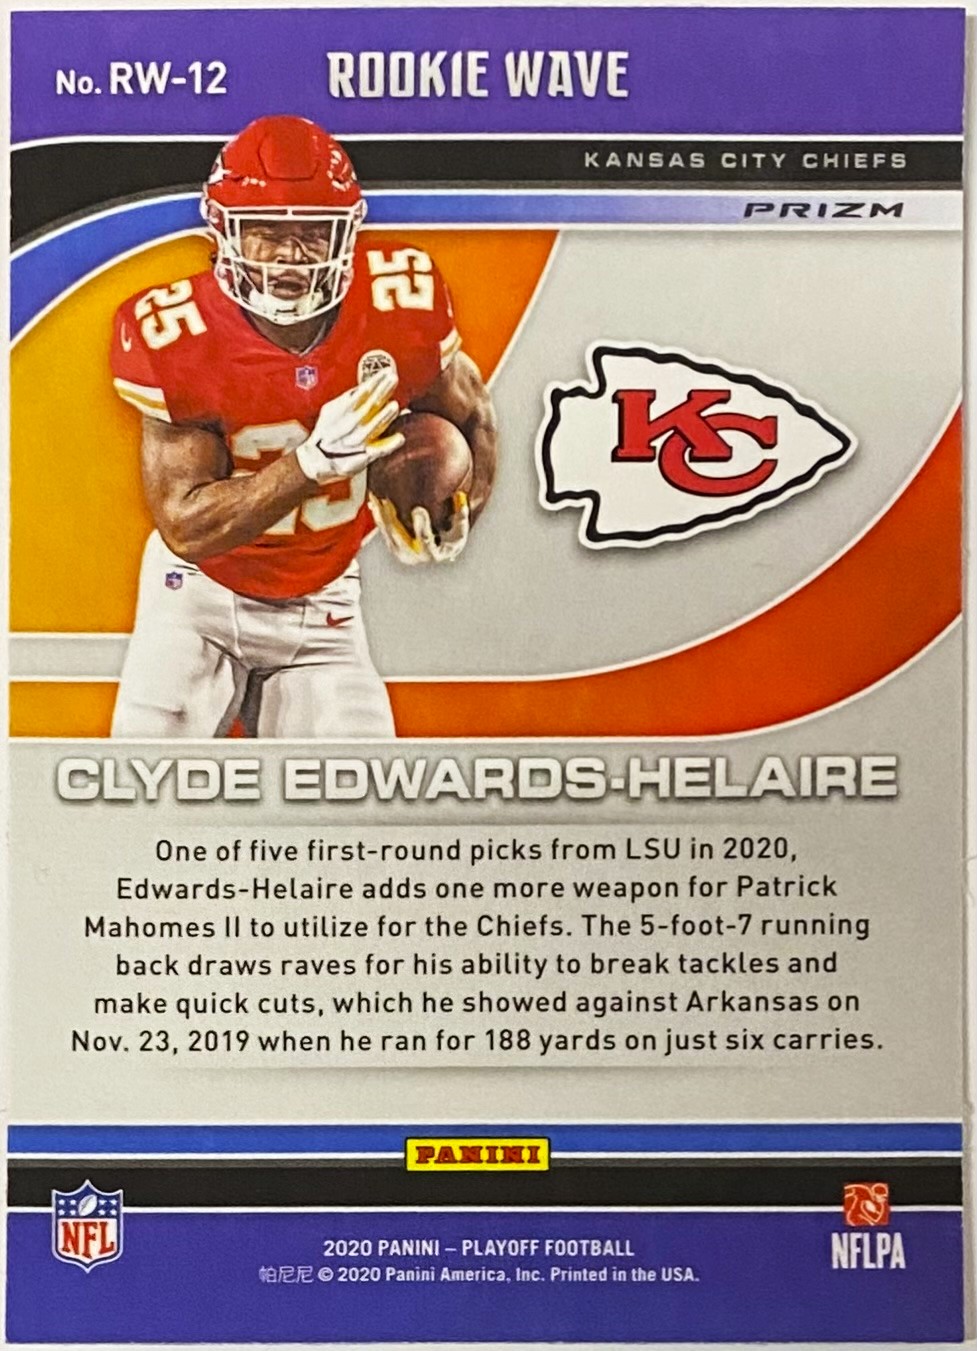 Clyde Edwards-Helaire Rookie Card Bundle 2020 Mosaic Base #212 Clyde Edwards-Helaire Kansas City Chiefs Rookie Card LSU Tigers Football Card in Toploader and 2 Packs of LSU Tigers Trading Cards 